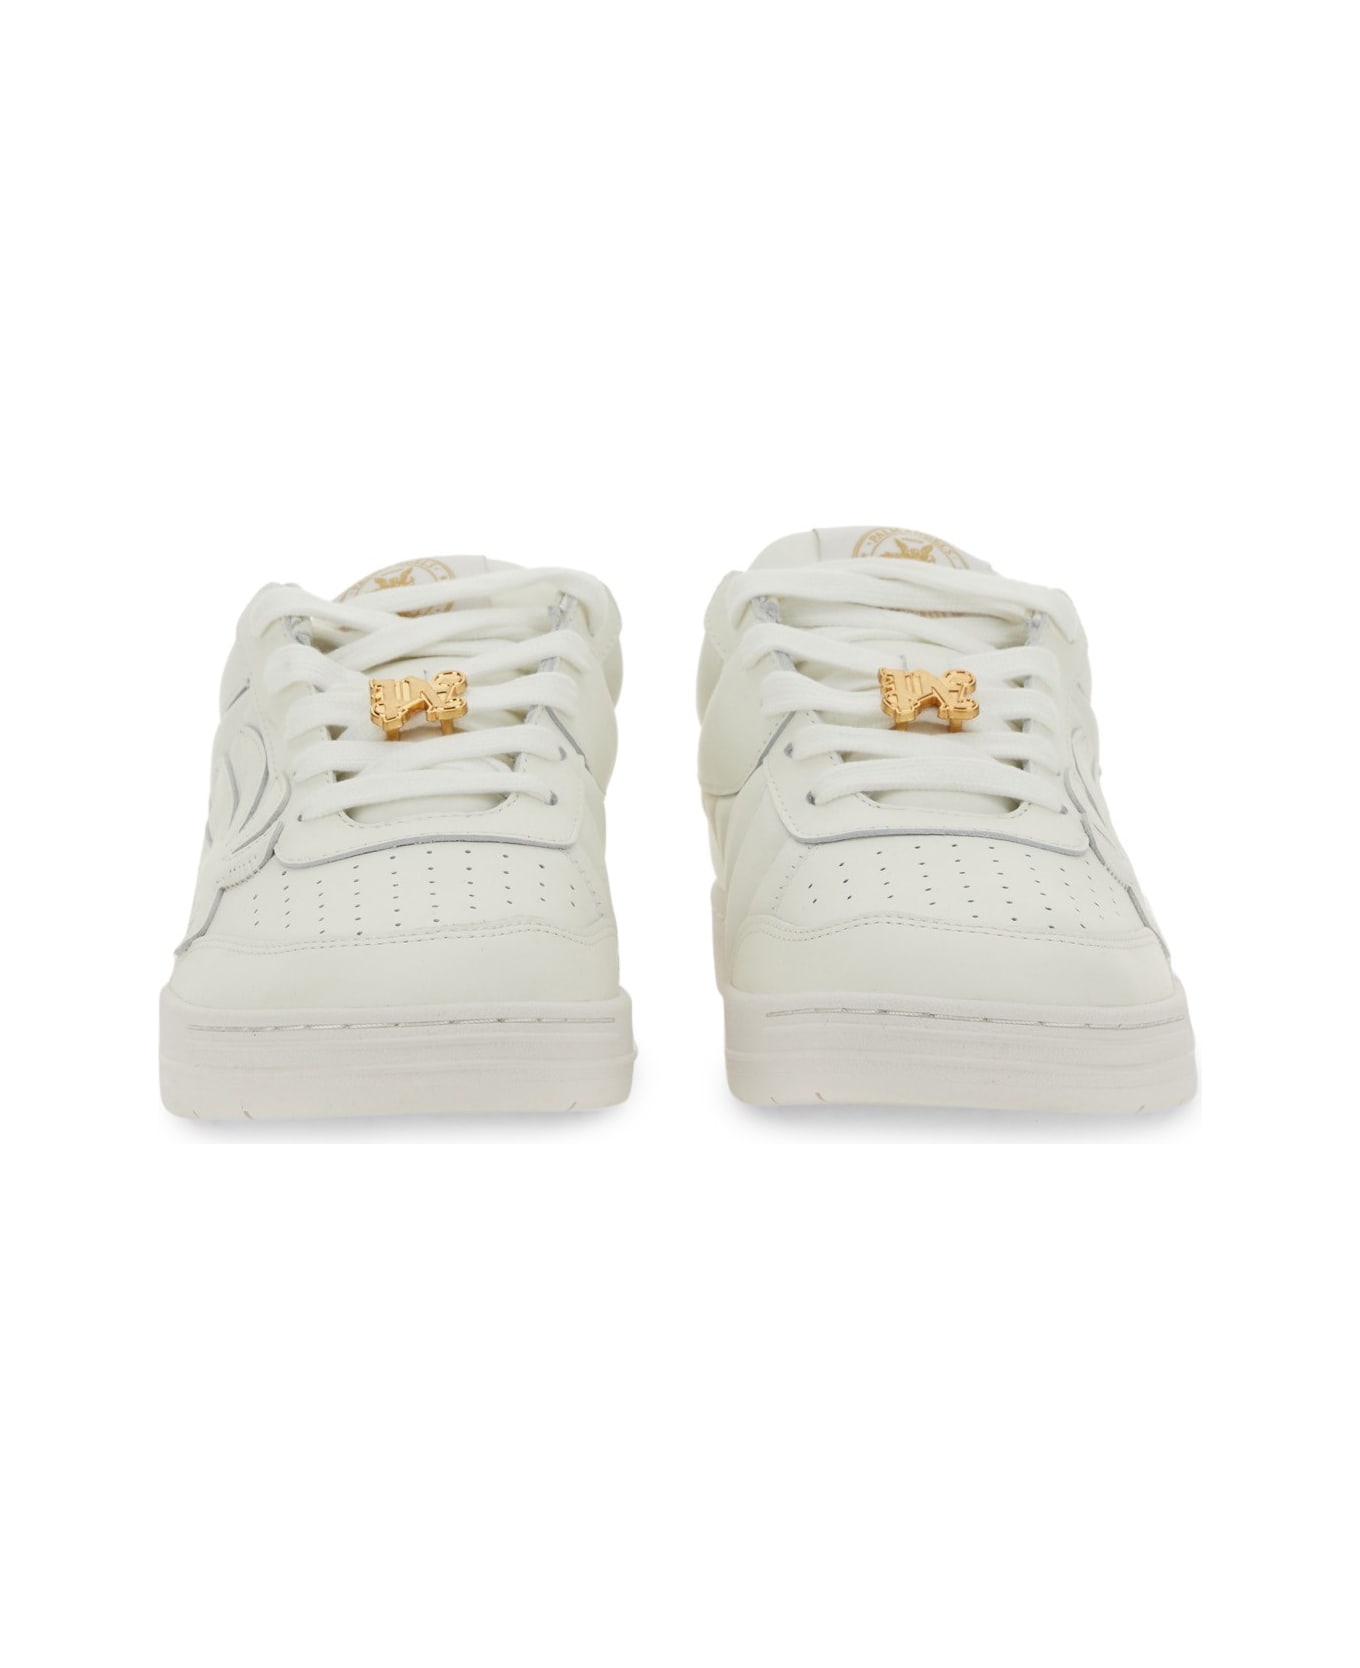 Palm Angels 'palm Beach University' White Leather Sneakers - BIANCO スニーカー